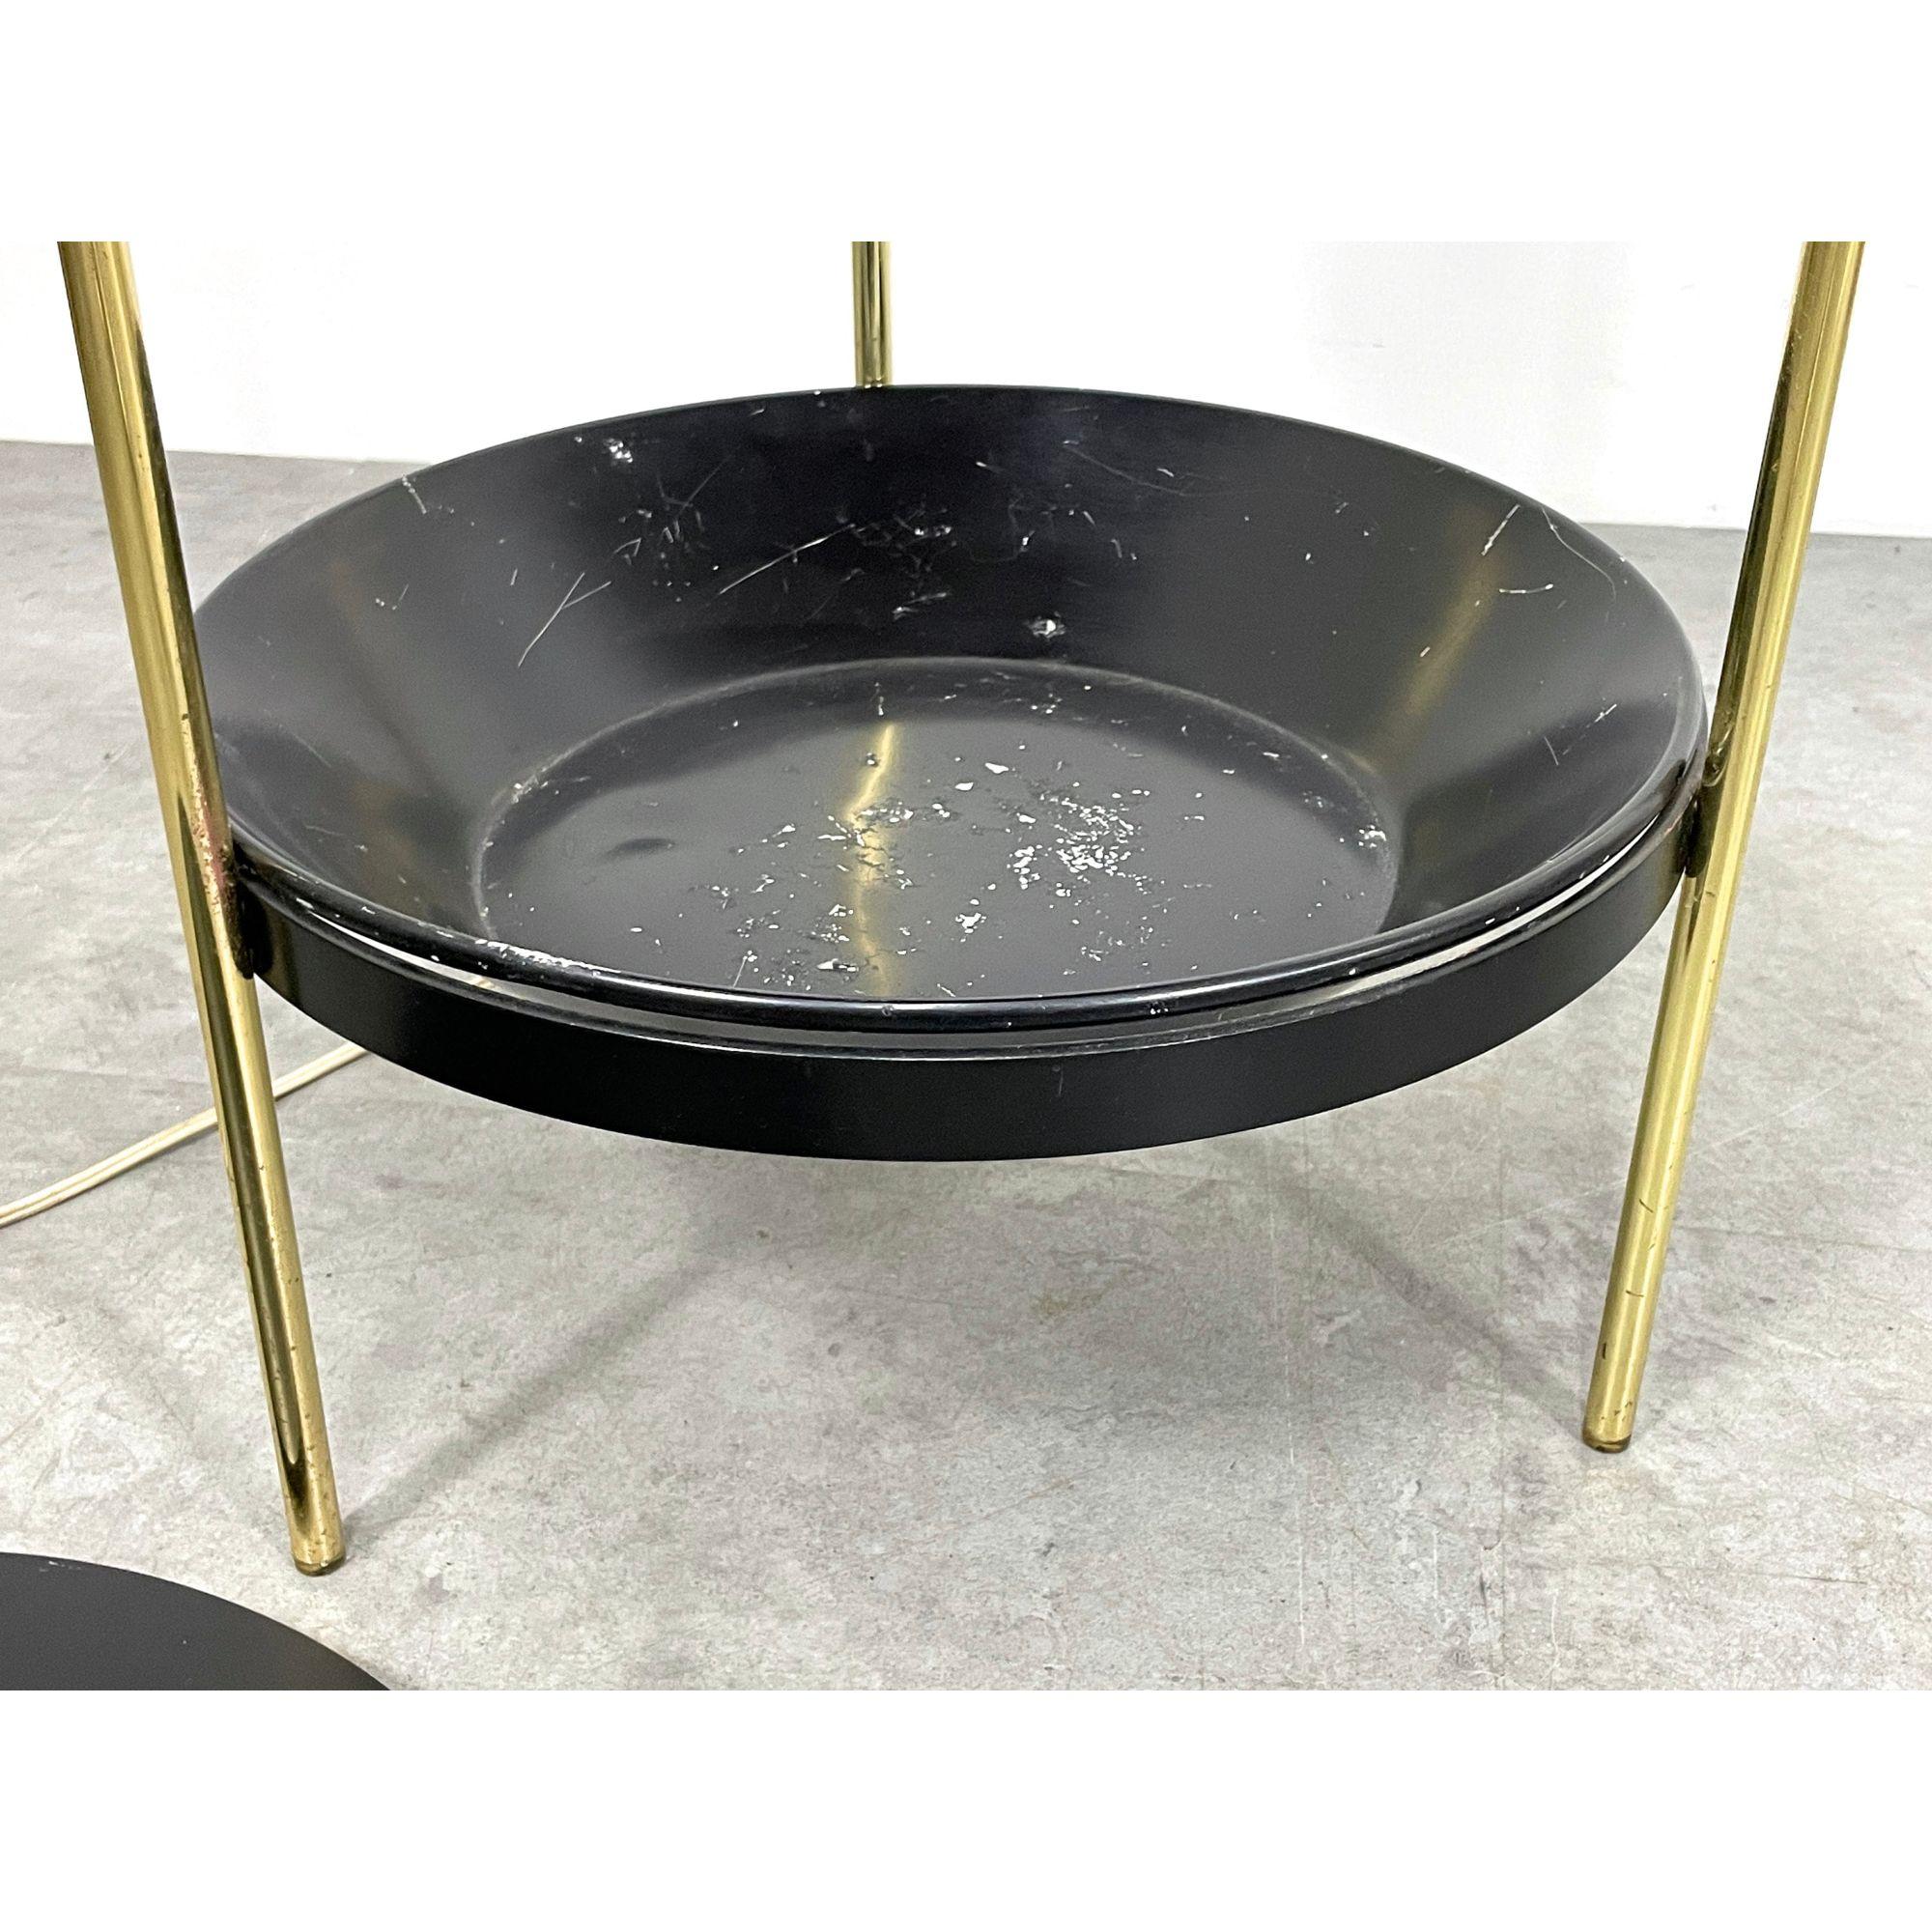 Mid Century Modern Vintage Brass Floor Lamp with Shelves by Laurel, circa 1960s For Sale 4